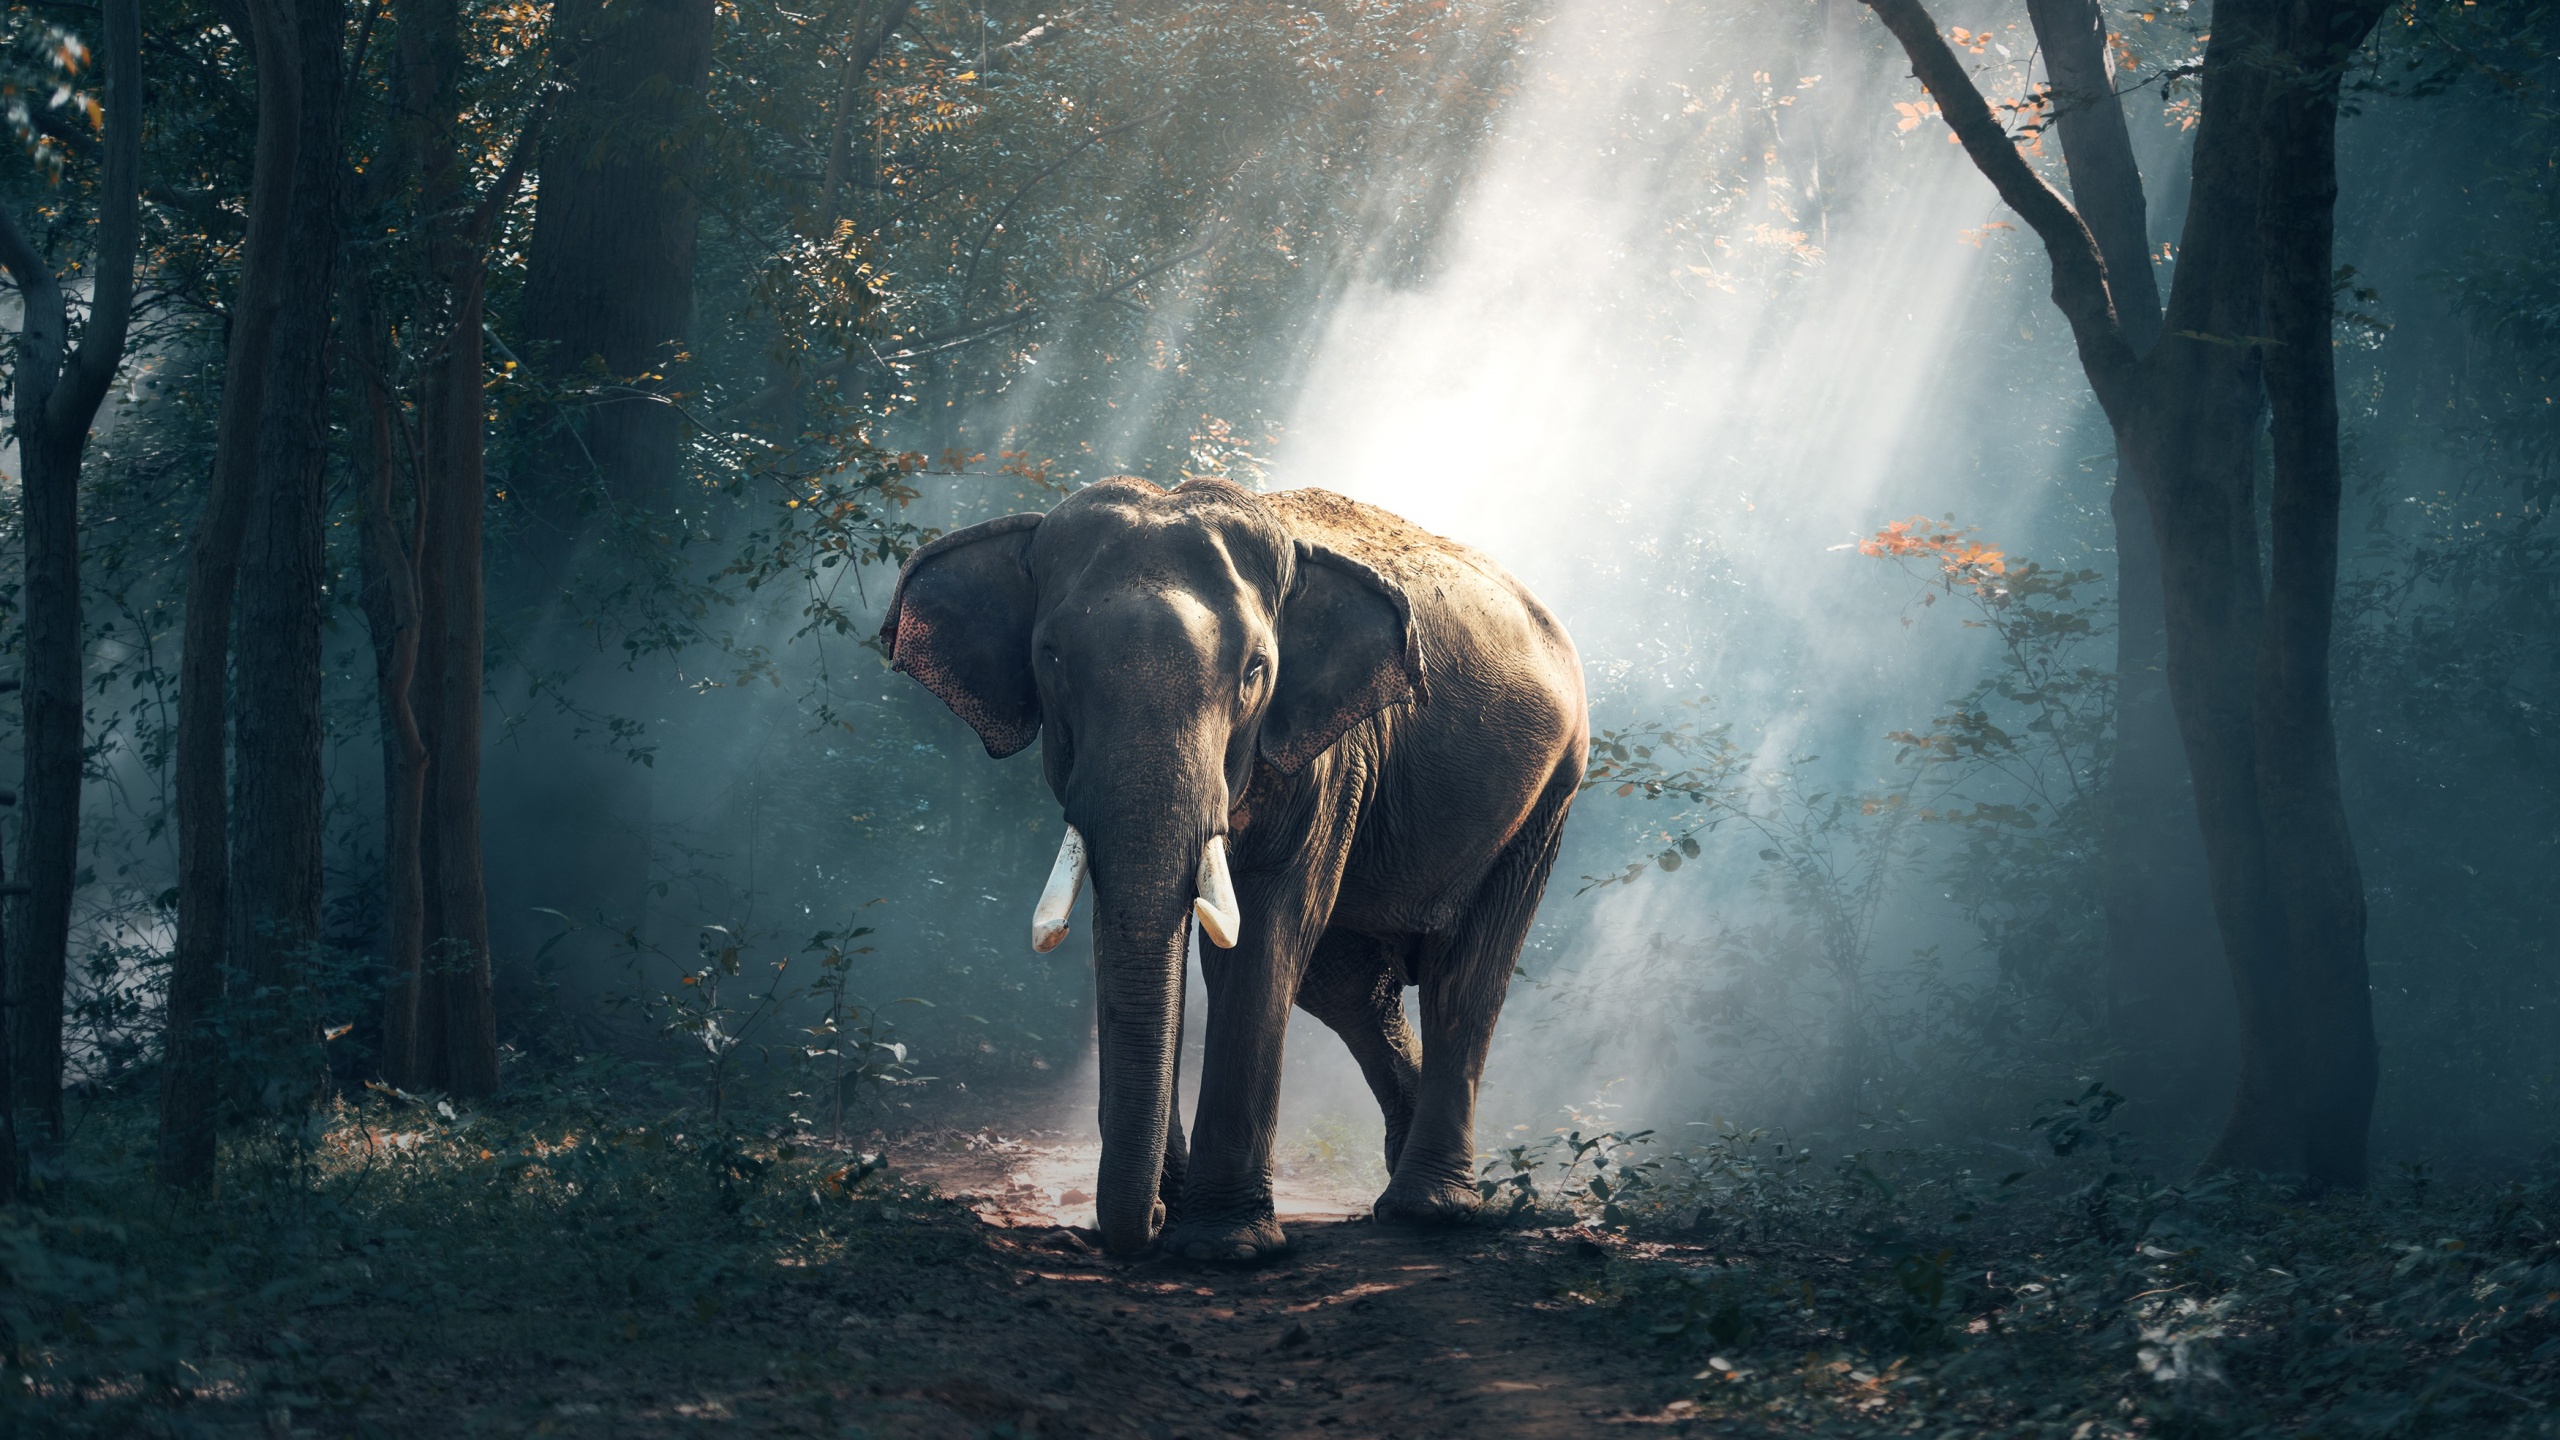 Elephant Walking on The Forest. Wallpaper in 2560x1440 Resolution